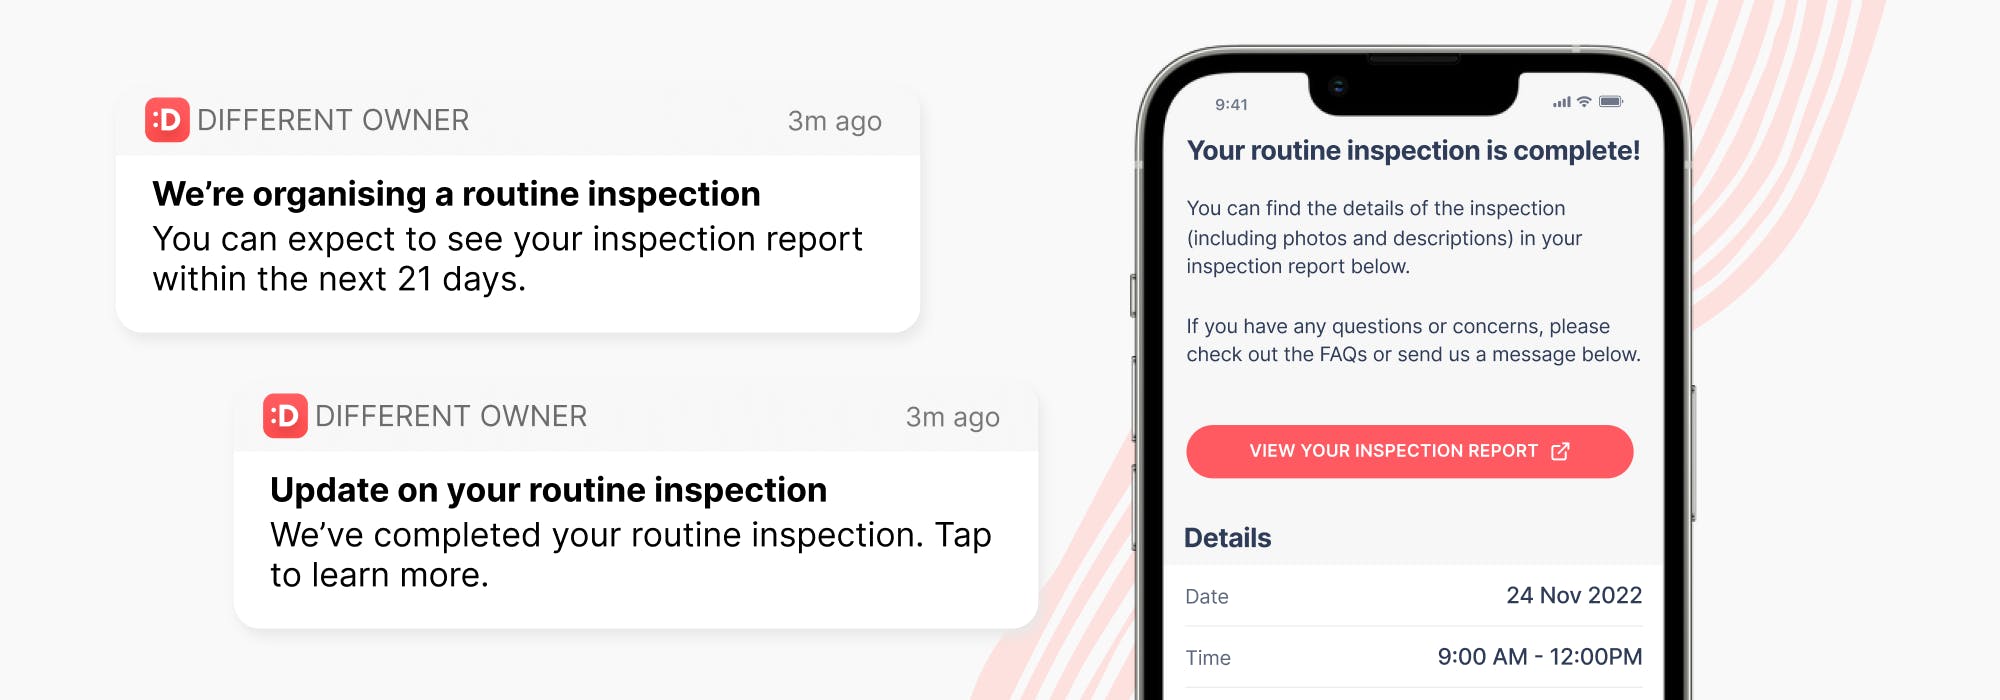 notifying landlords of updates on routine inspections using the different owner app 